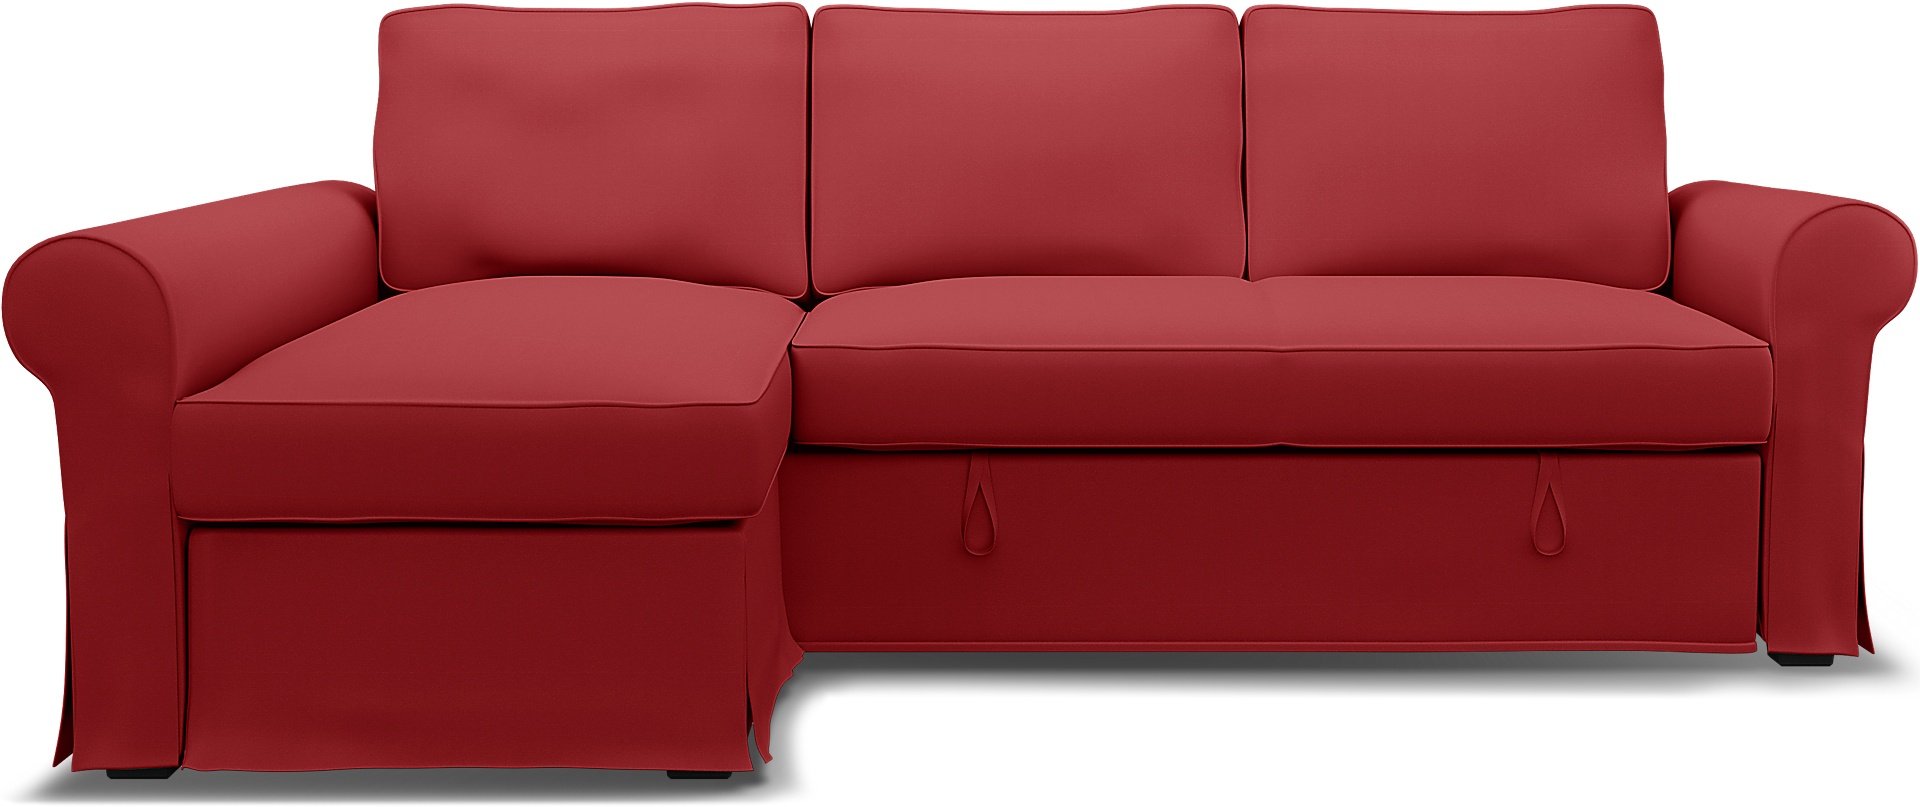 IKEA - Backabro Sofabed with Chaise Cover, Scarlet Red, Cotton - Bemz